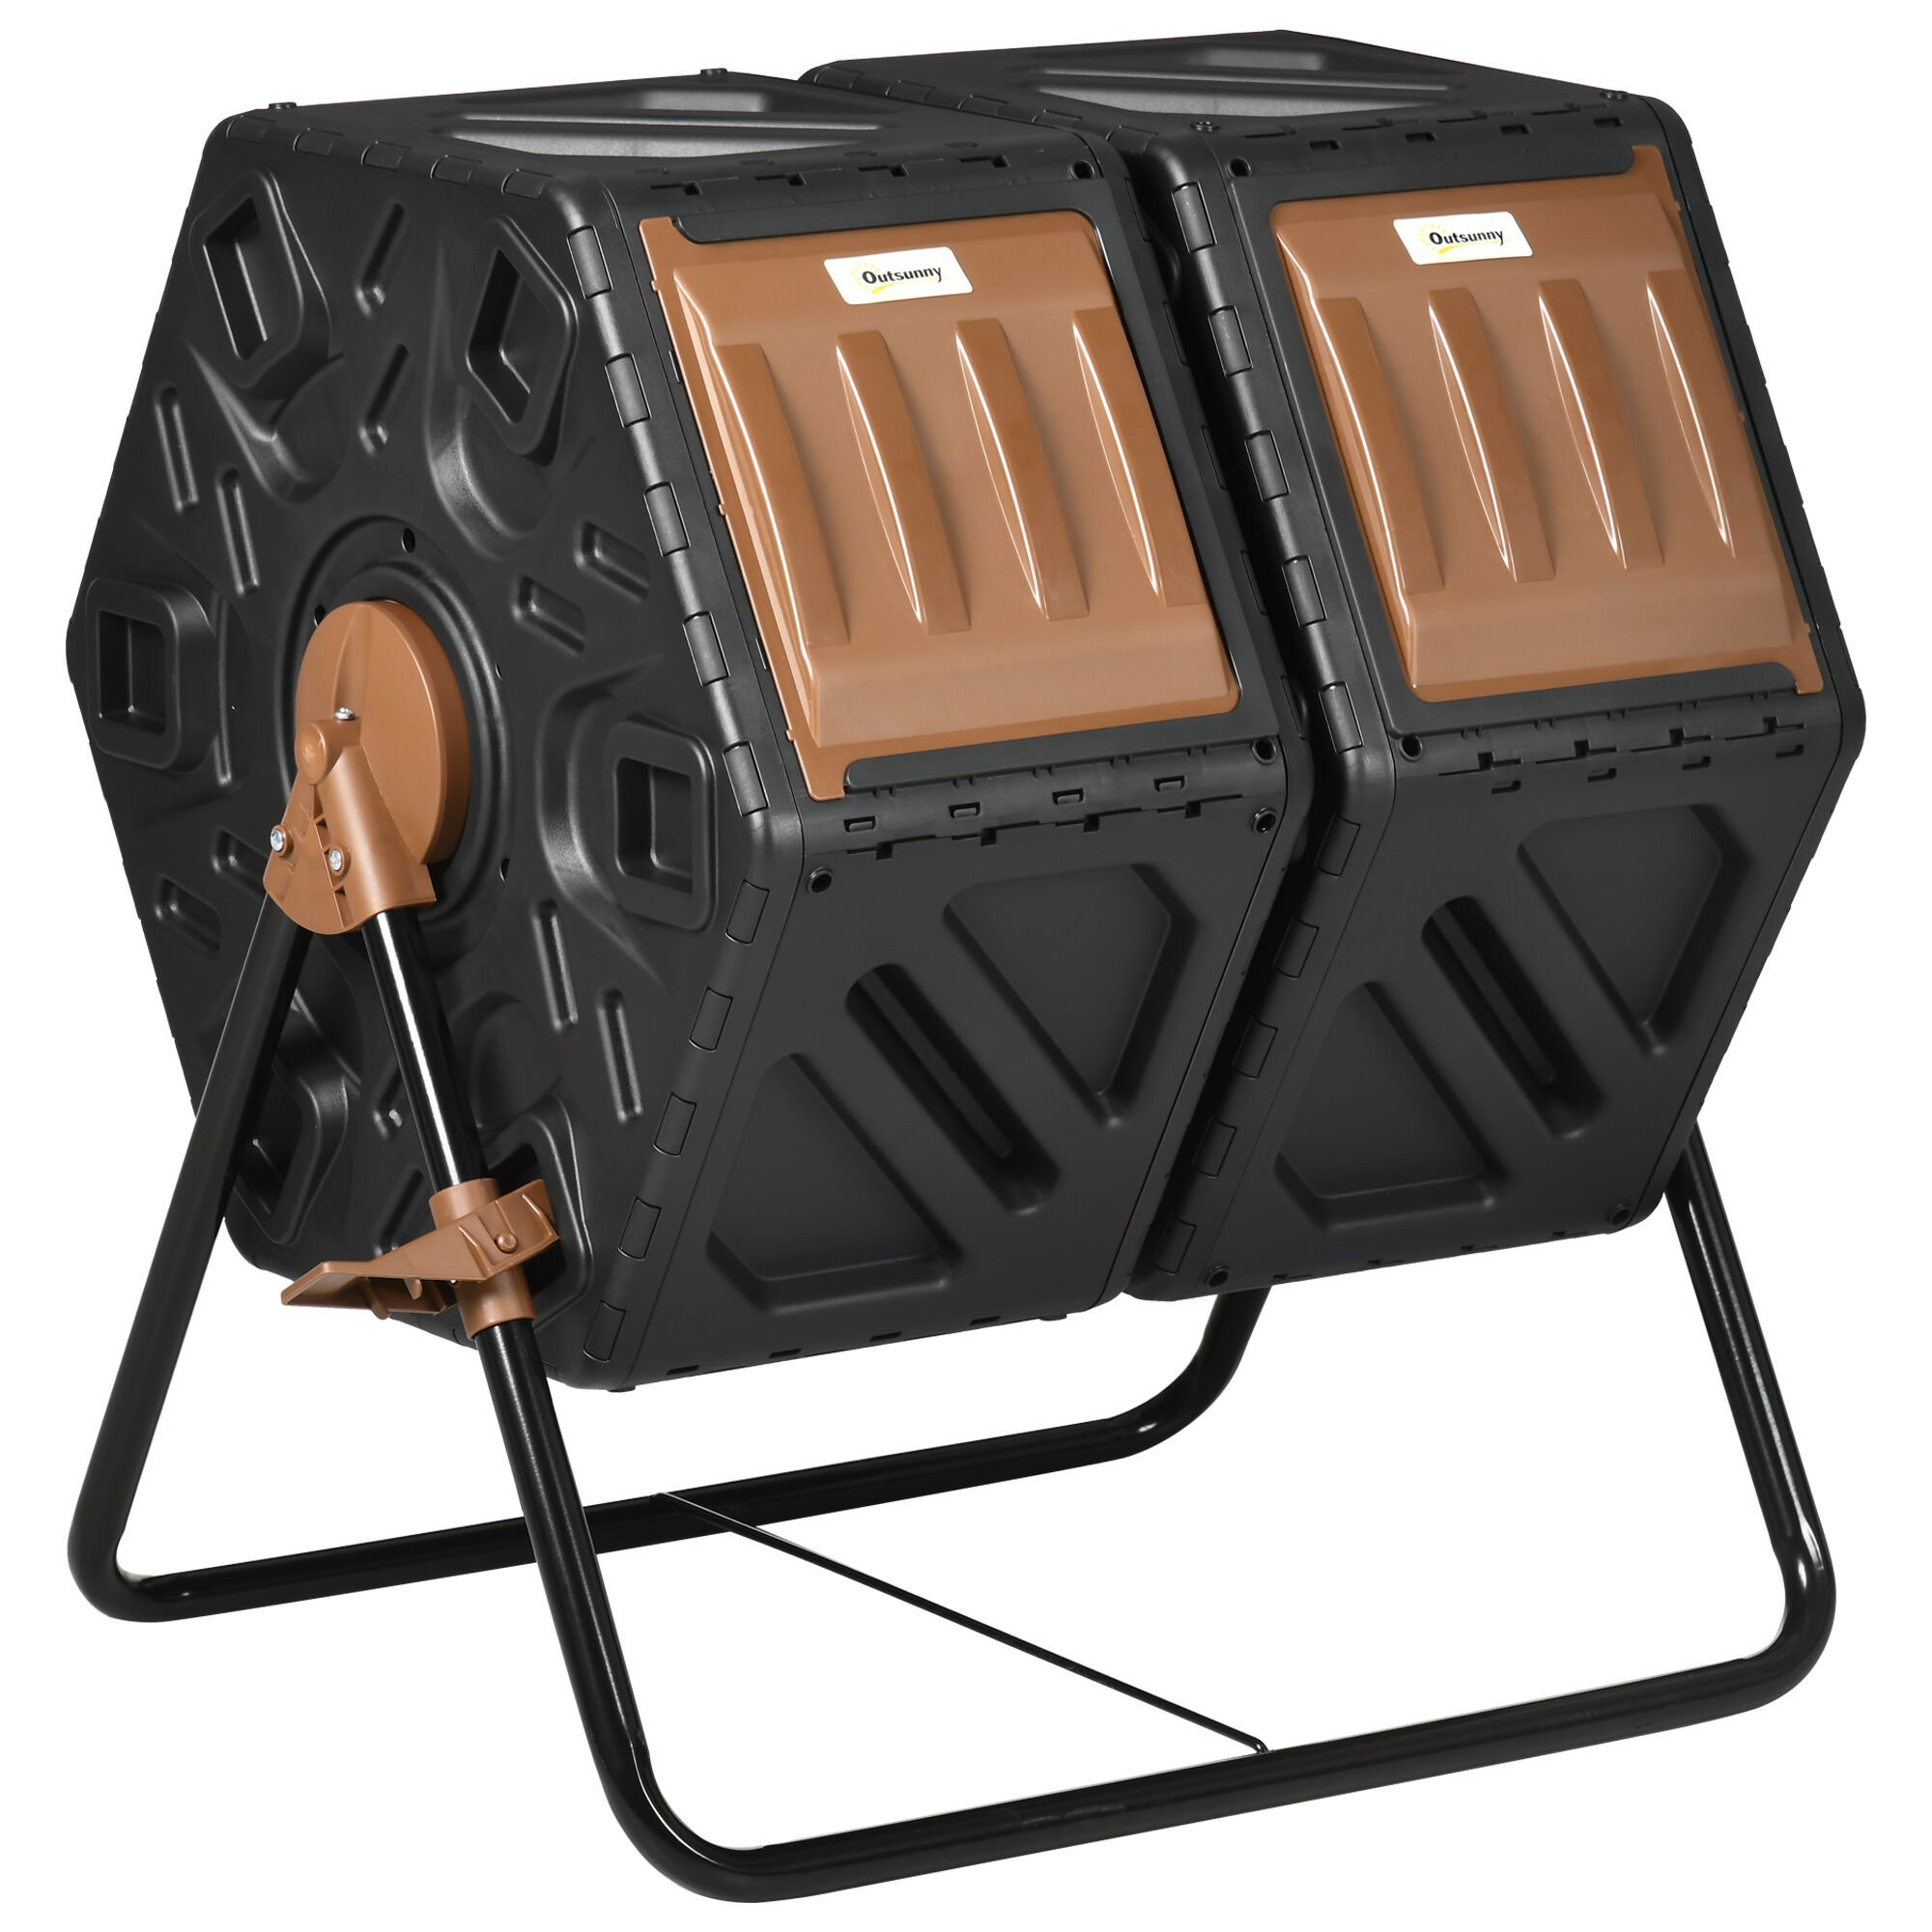 Outsunny Dual Rotating Compost Bin 34.5 Gallon Tumbler with Ventilation and Steel Legs   Aosom.com Eco-Friendly Gardening